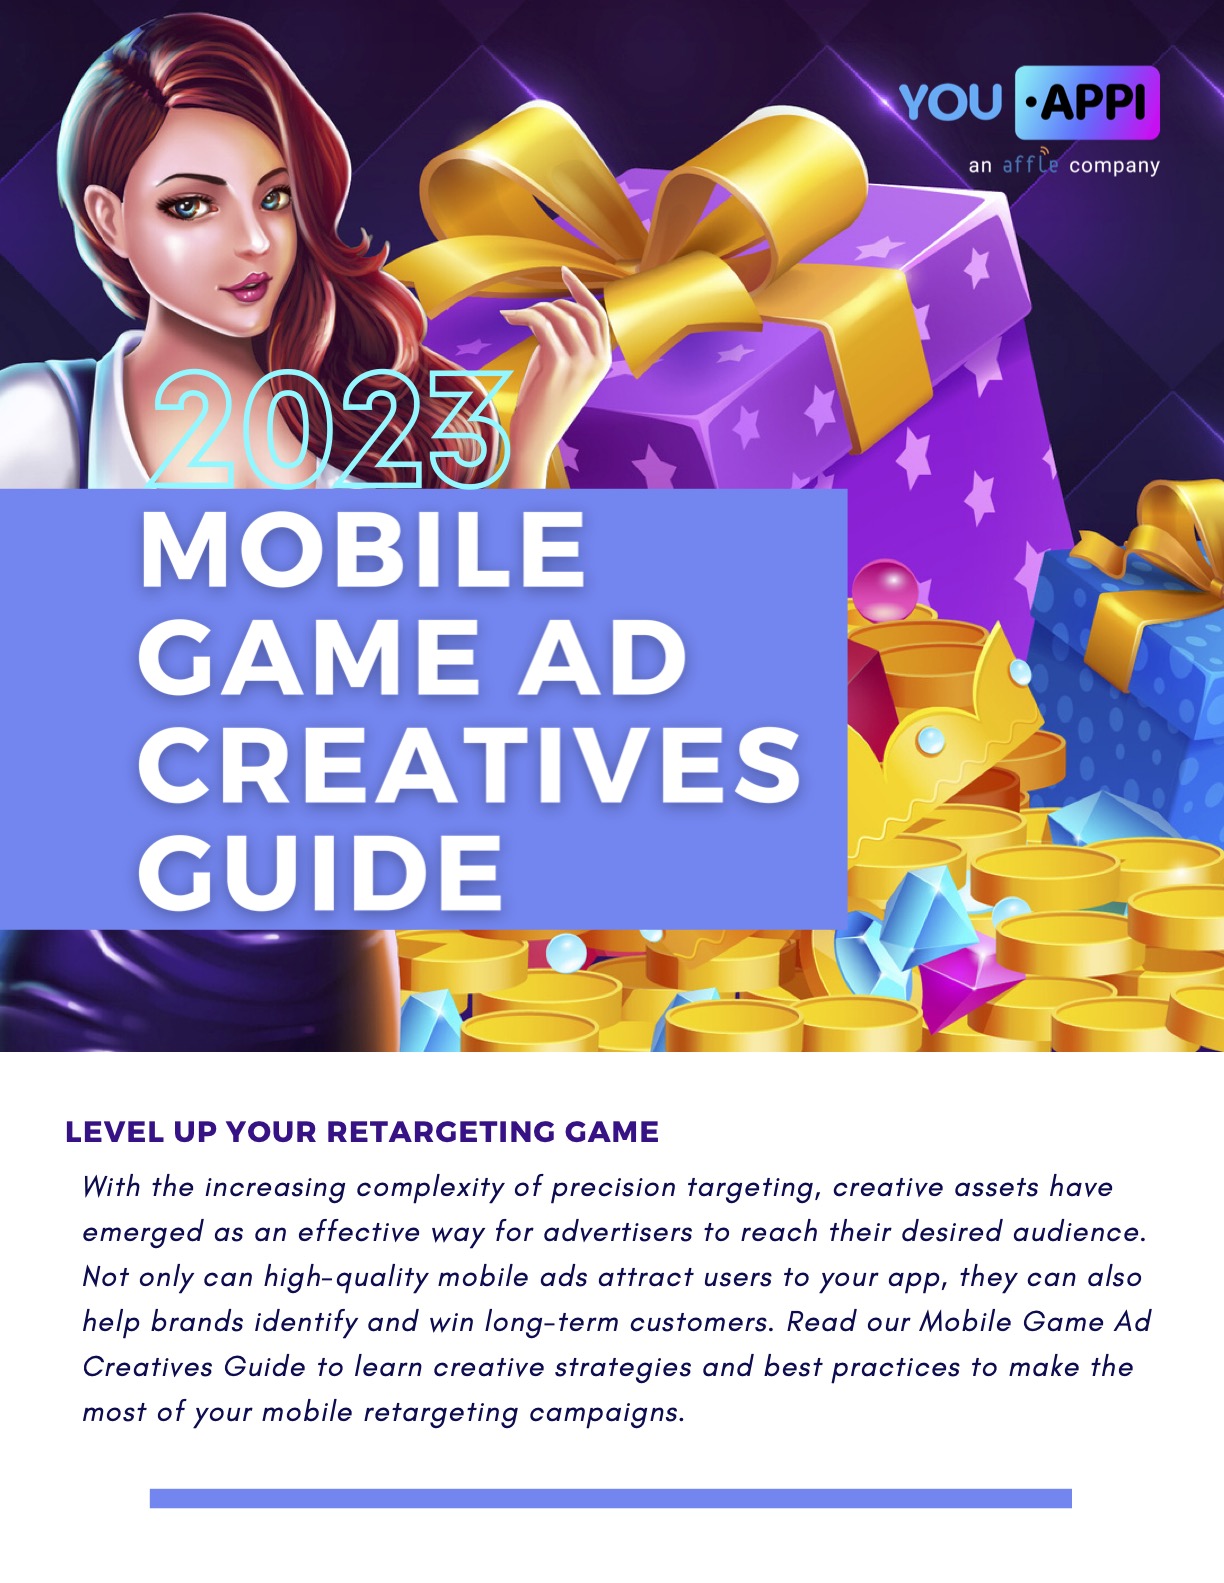 YouAppi 2023 Mobile Game Ad Creatives Guide Pg 1 2 #keepProtocol